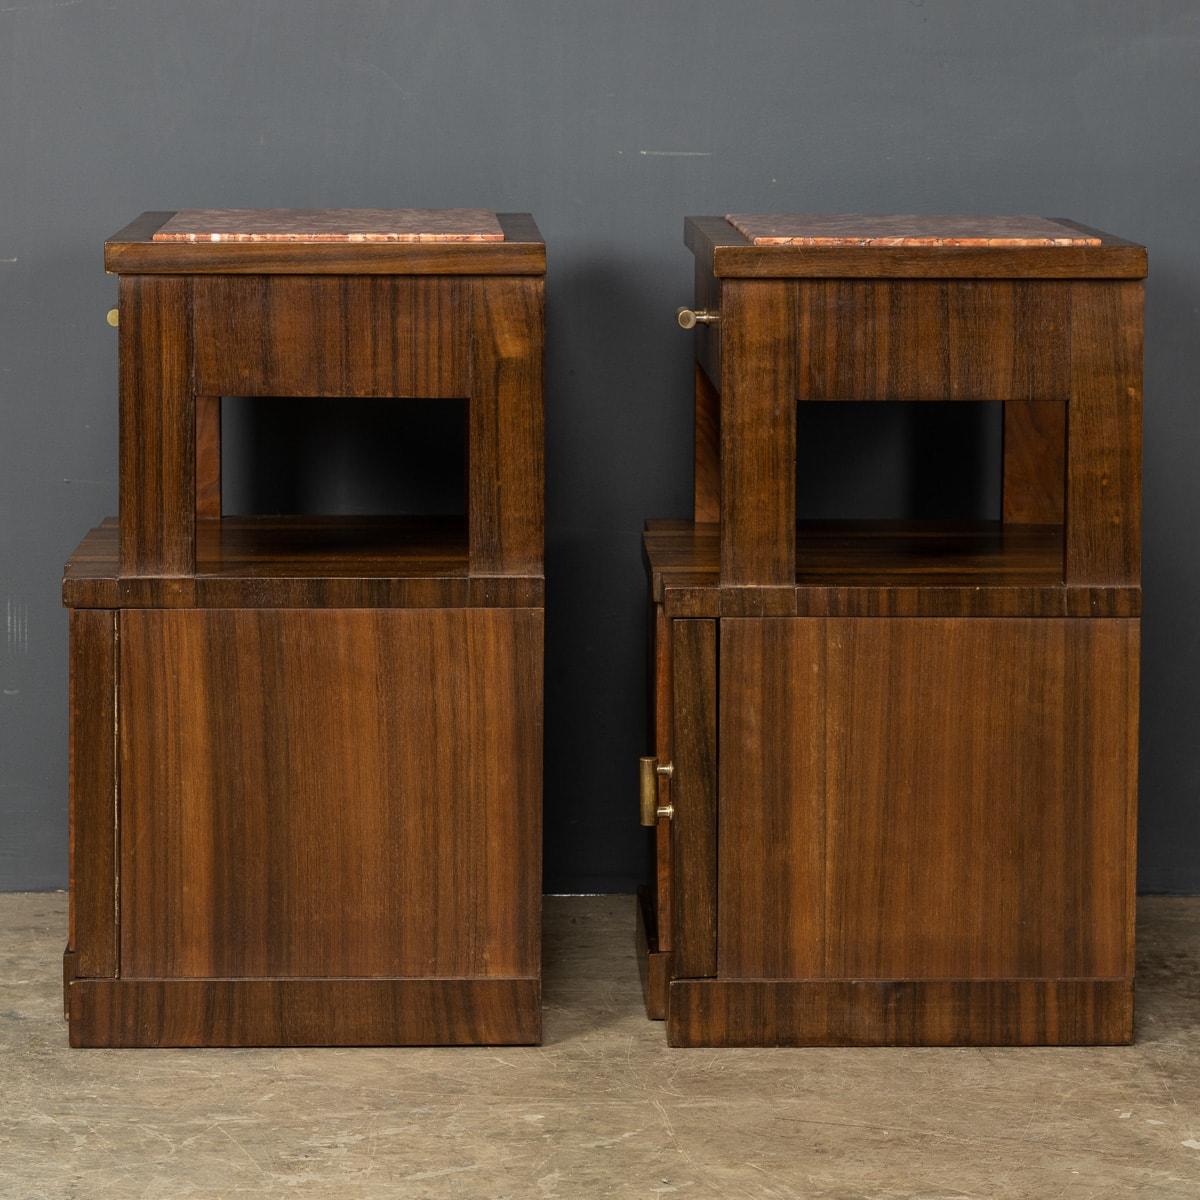 20th Century Italian Pair of Kingwood & Marble Bedside Cabinets, C.1950 For Sale 2